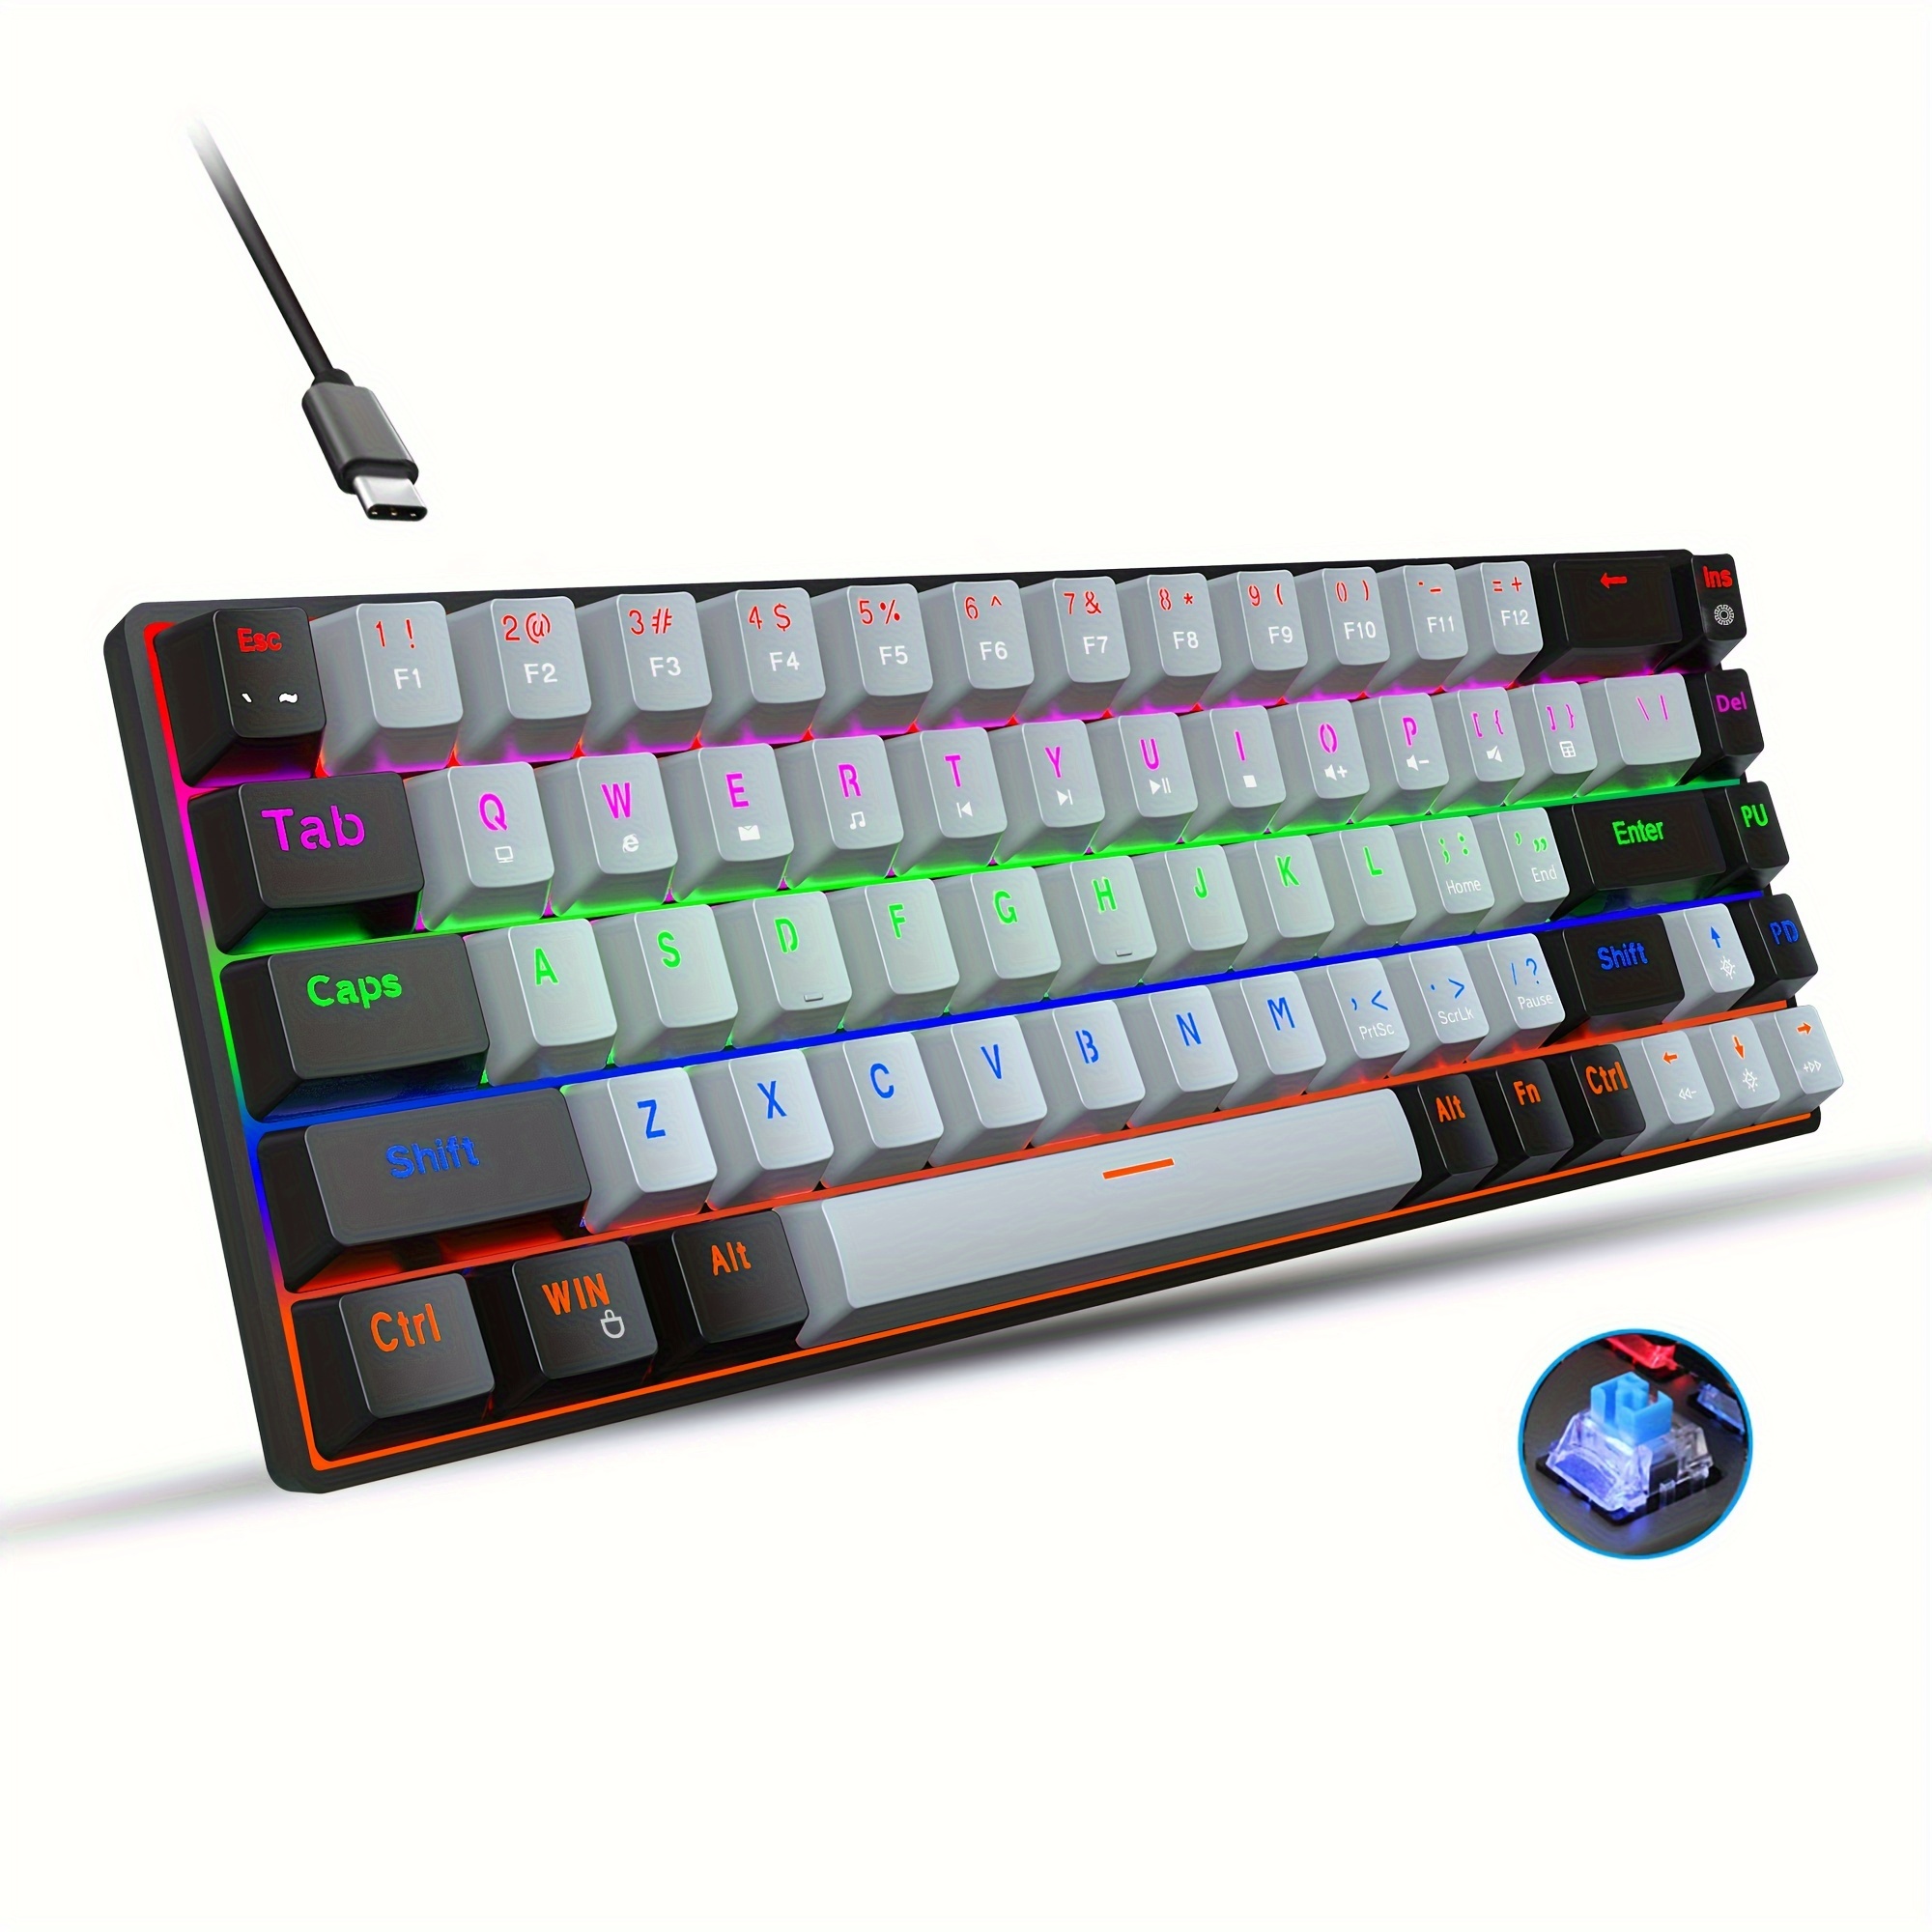 RGB MECHANICAL GAMING KEYBOARD V8 CHINA WITH BLUE SWITCH